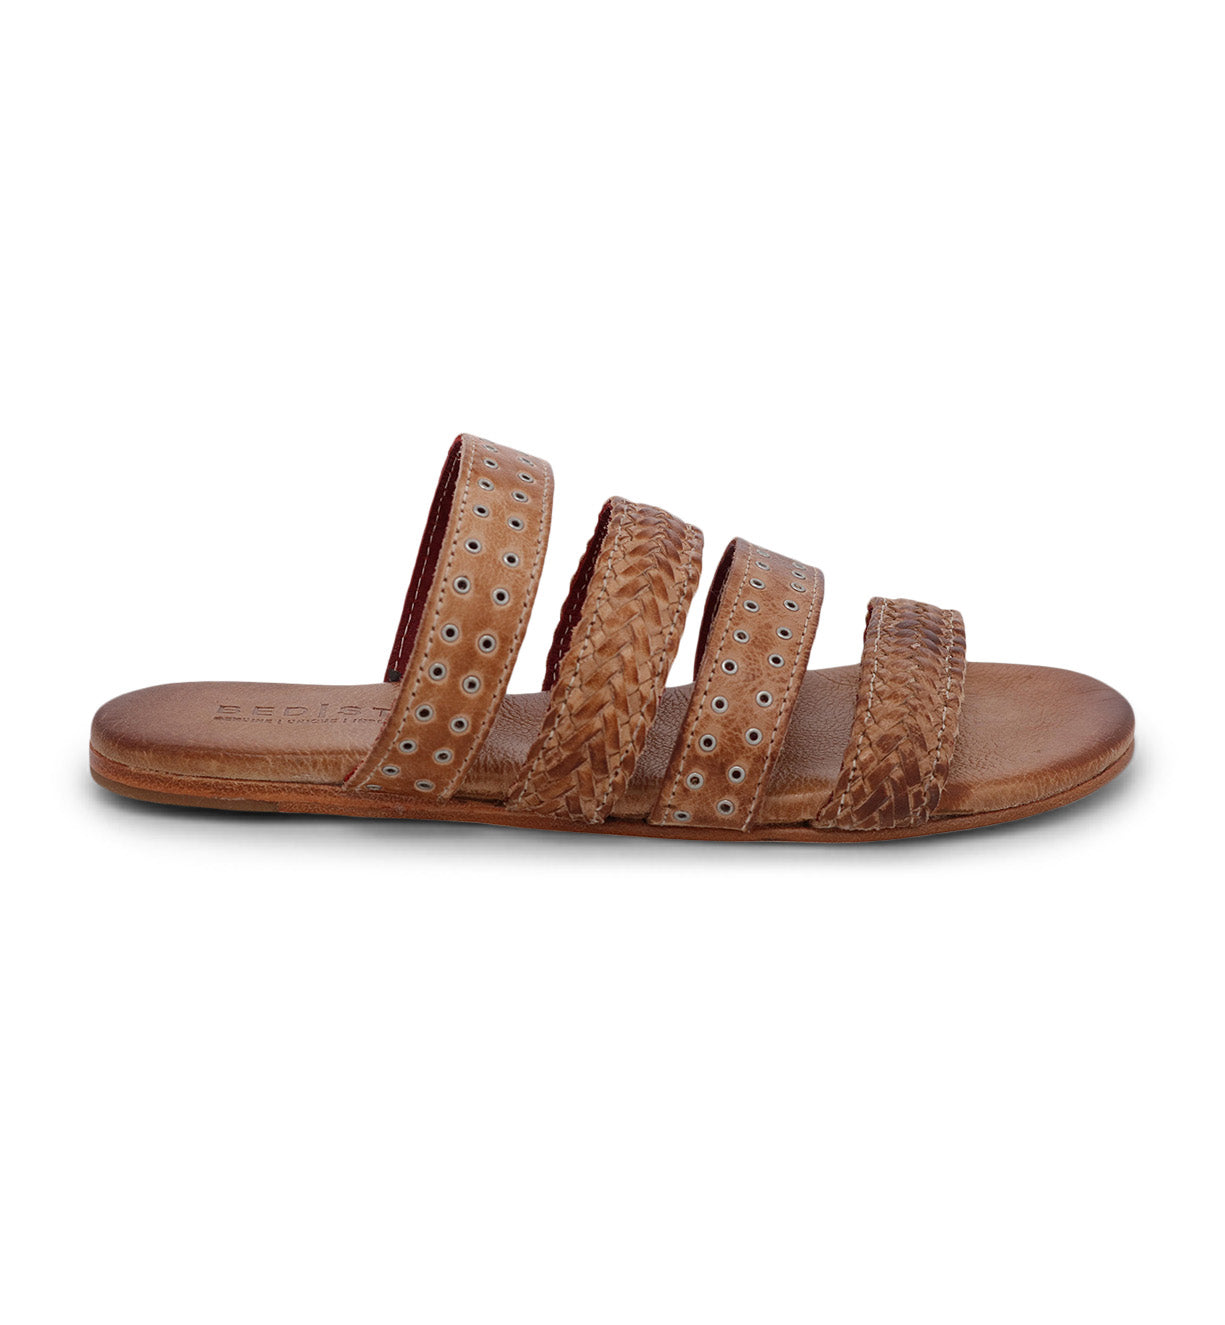 A women's Henna sandal with studded straps by Bed Stu.